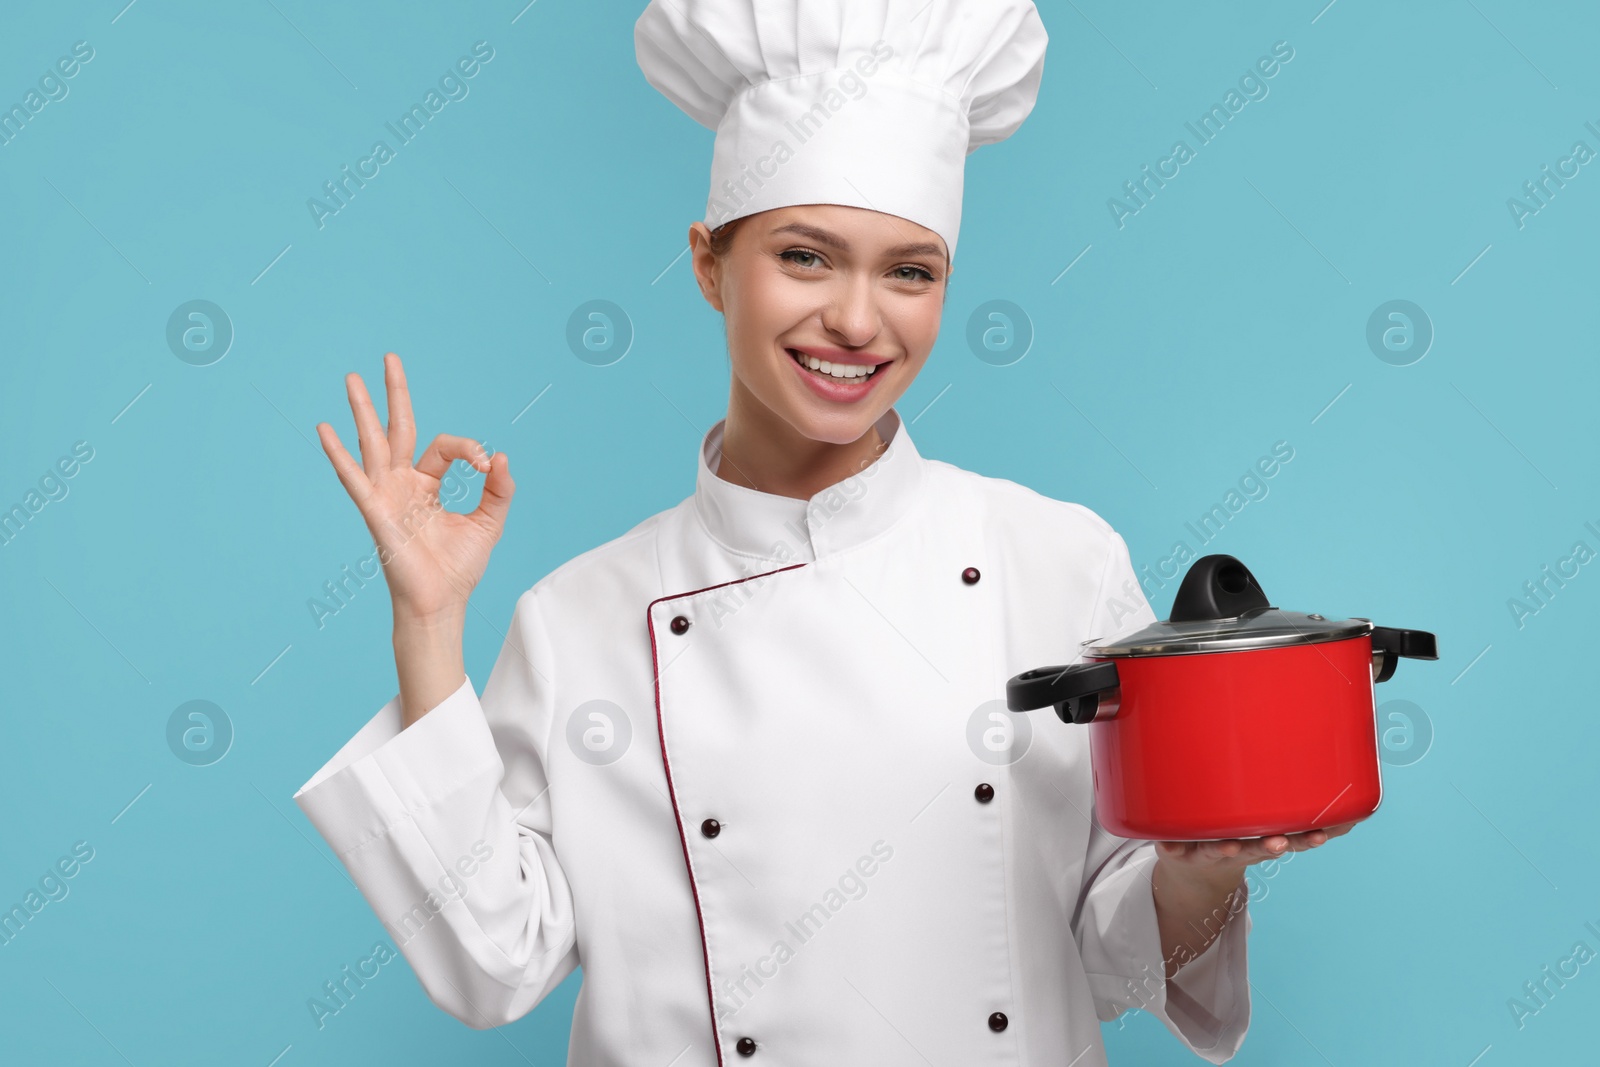 Photo of Happy chef in uniform holding cooking pot and showing OK gesture on light blue background